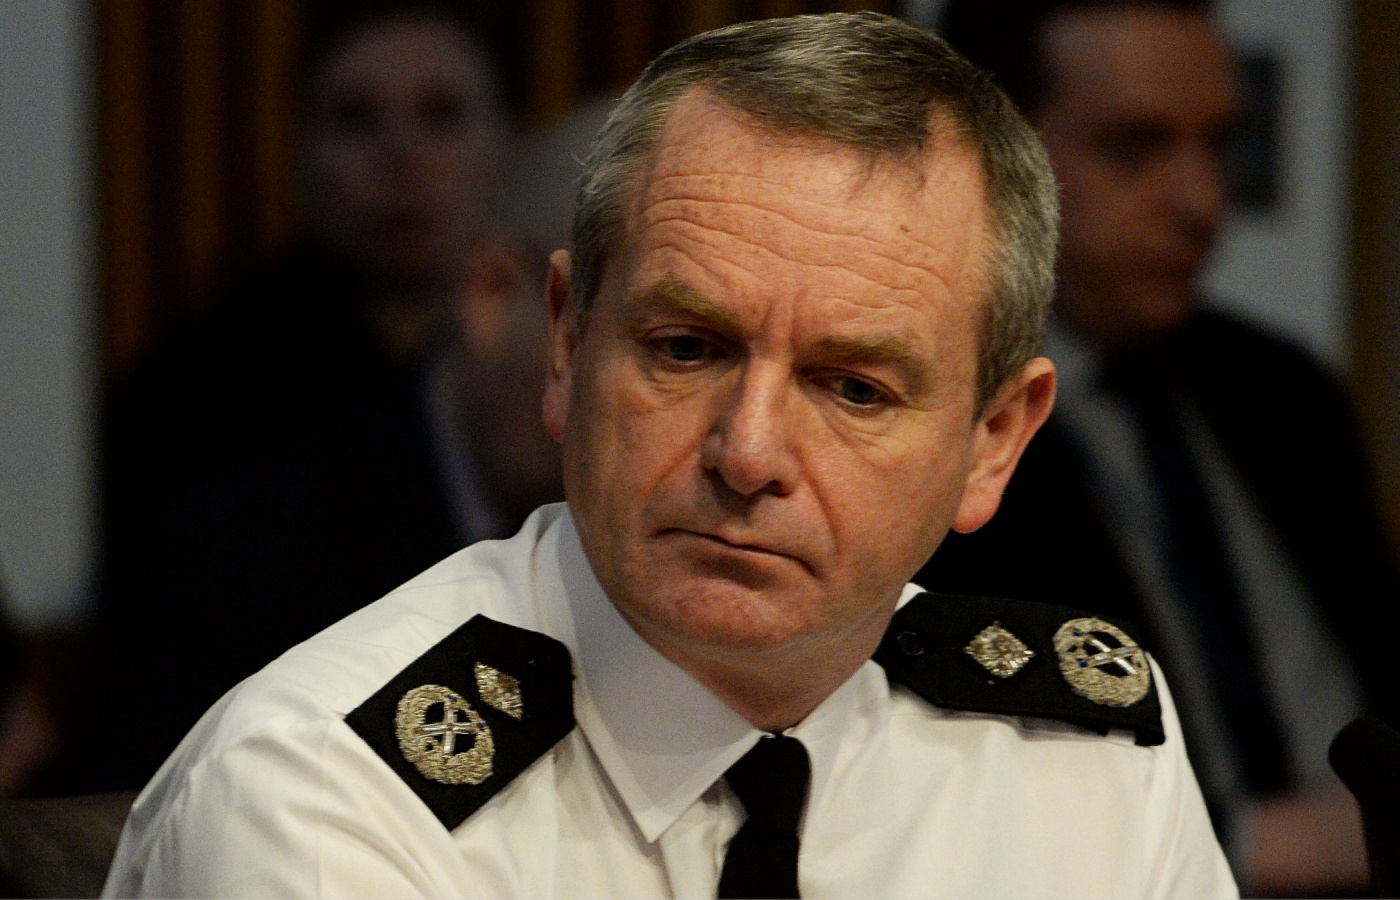 Then deputy chief constable designate Iain Livingstone giving evidence to the Scottish Parliament's Justice Committee on policing in Scotland in 2018.